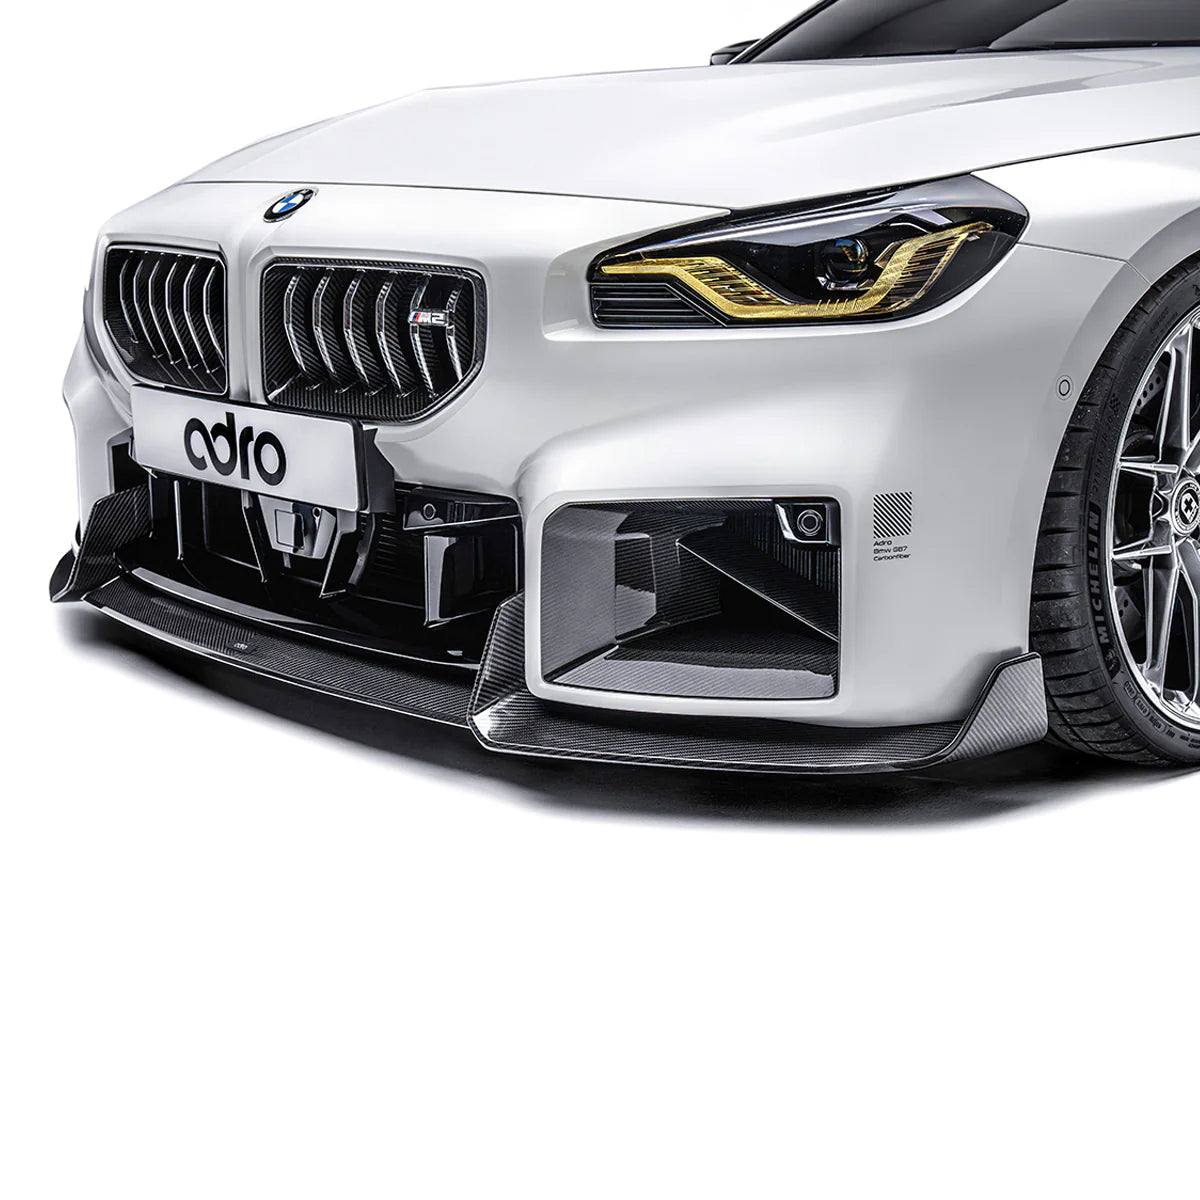 ADRO BMW G87 M2 FRONT LIP - PREORDER NOW! DUE JAN 2024